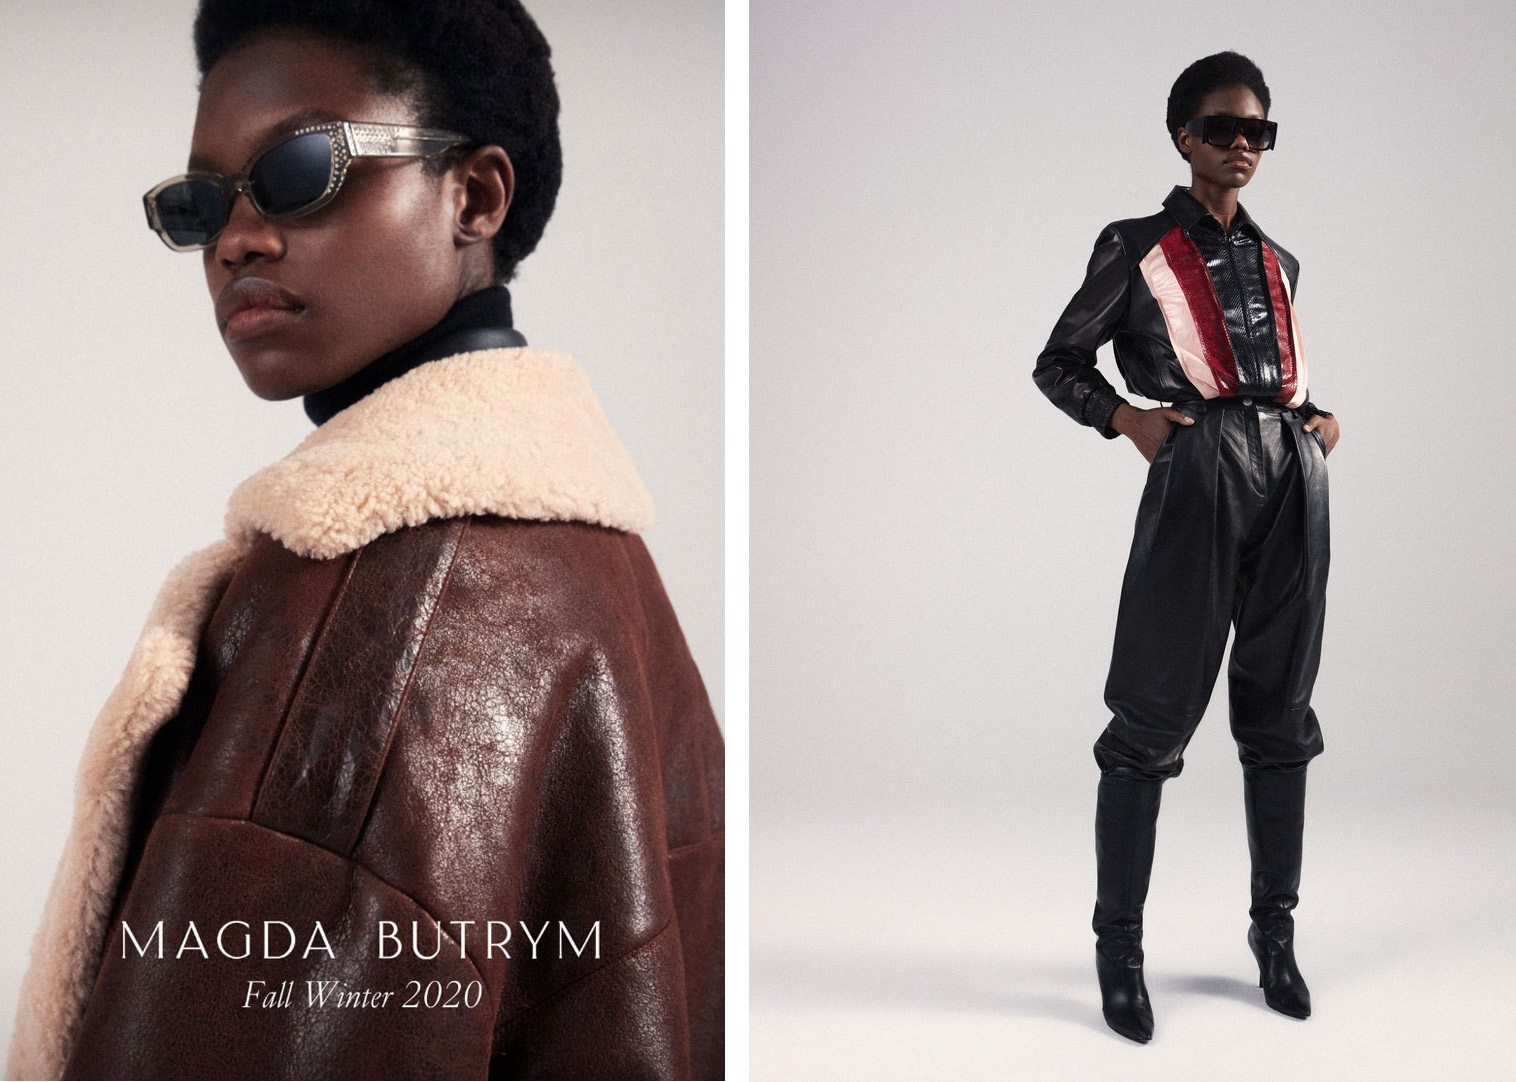 Commercial for Magda Butrym with makeup by Aga Brudny